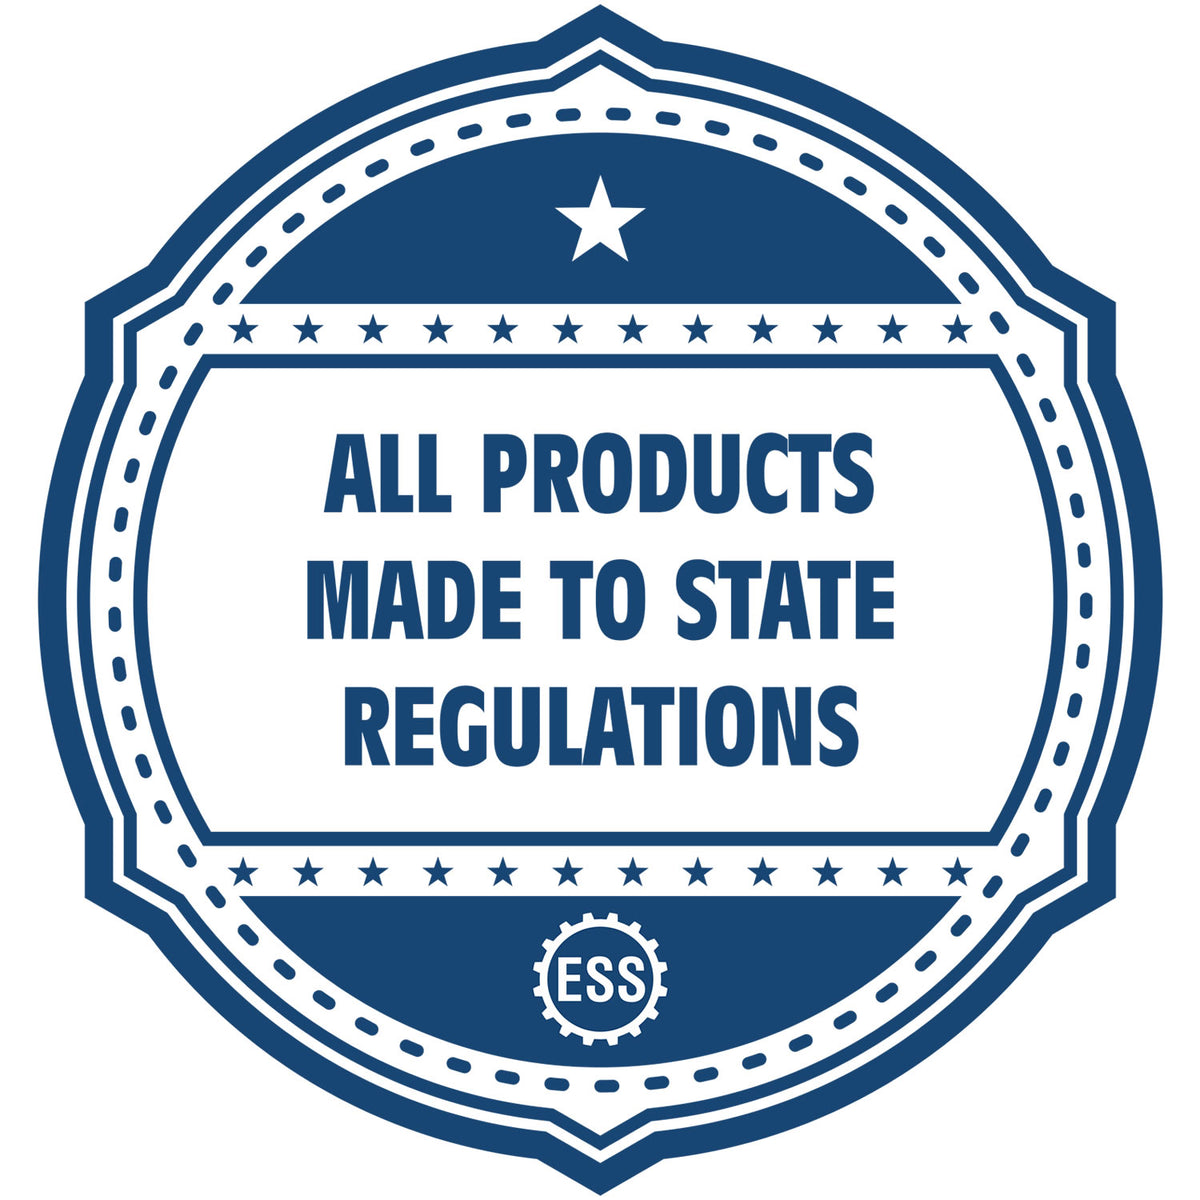 An icon or badge element for the State of Texas Long Reach Architectural Embossing Seal showing that this product is made in compliance with state regulations.